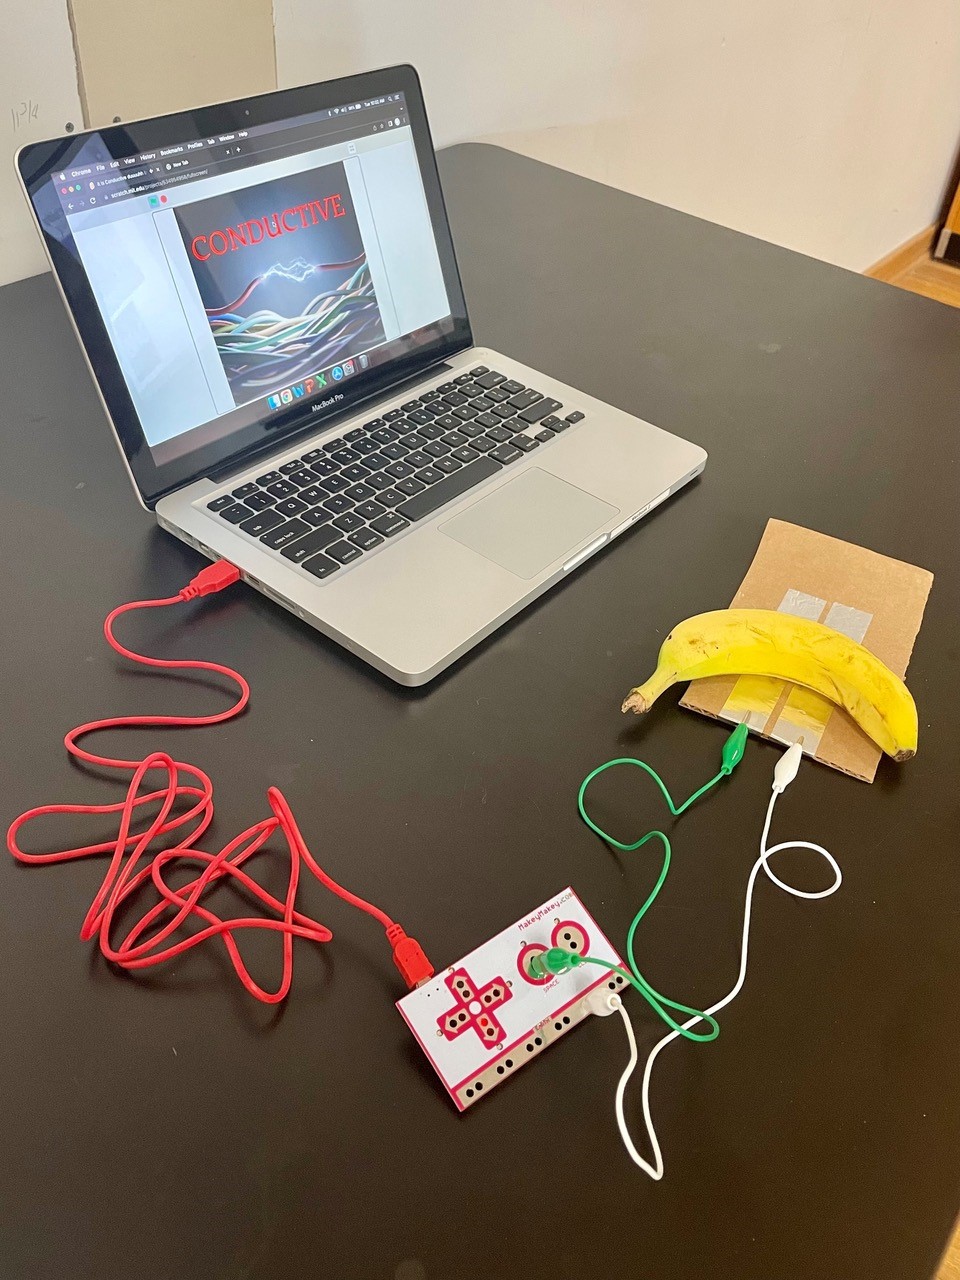 Using cardboard, HVAC conductive tape and alligator clips, students used Makey Makey to test over 30 objects to see if each object was conductive or not.